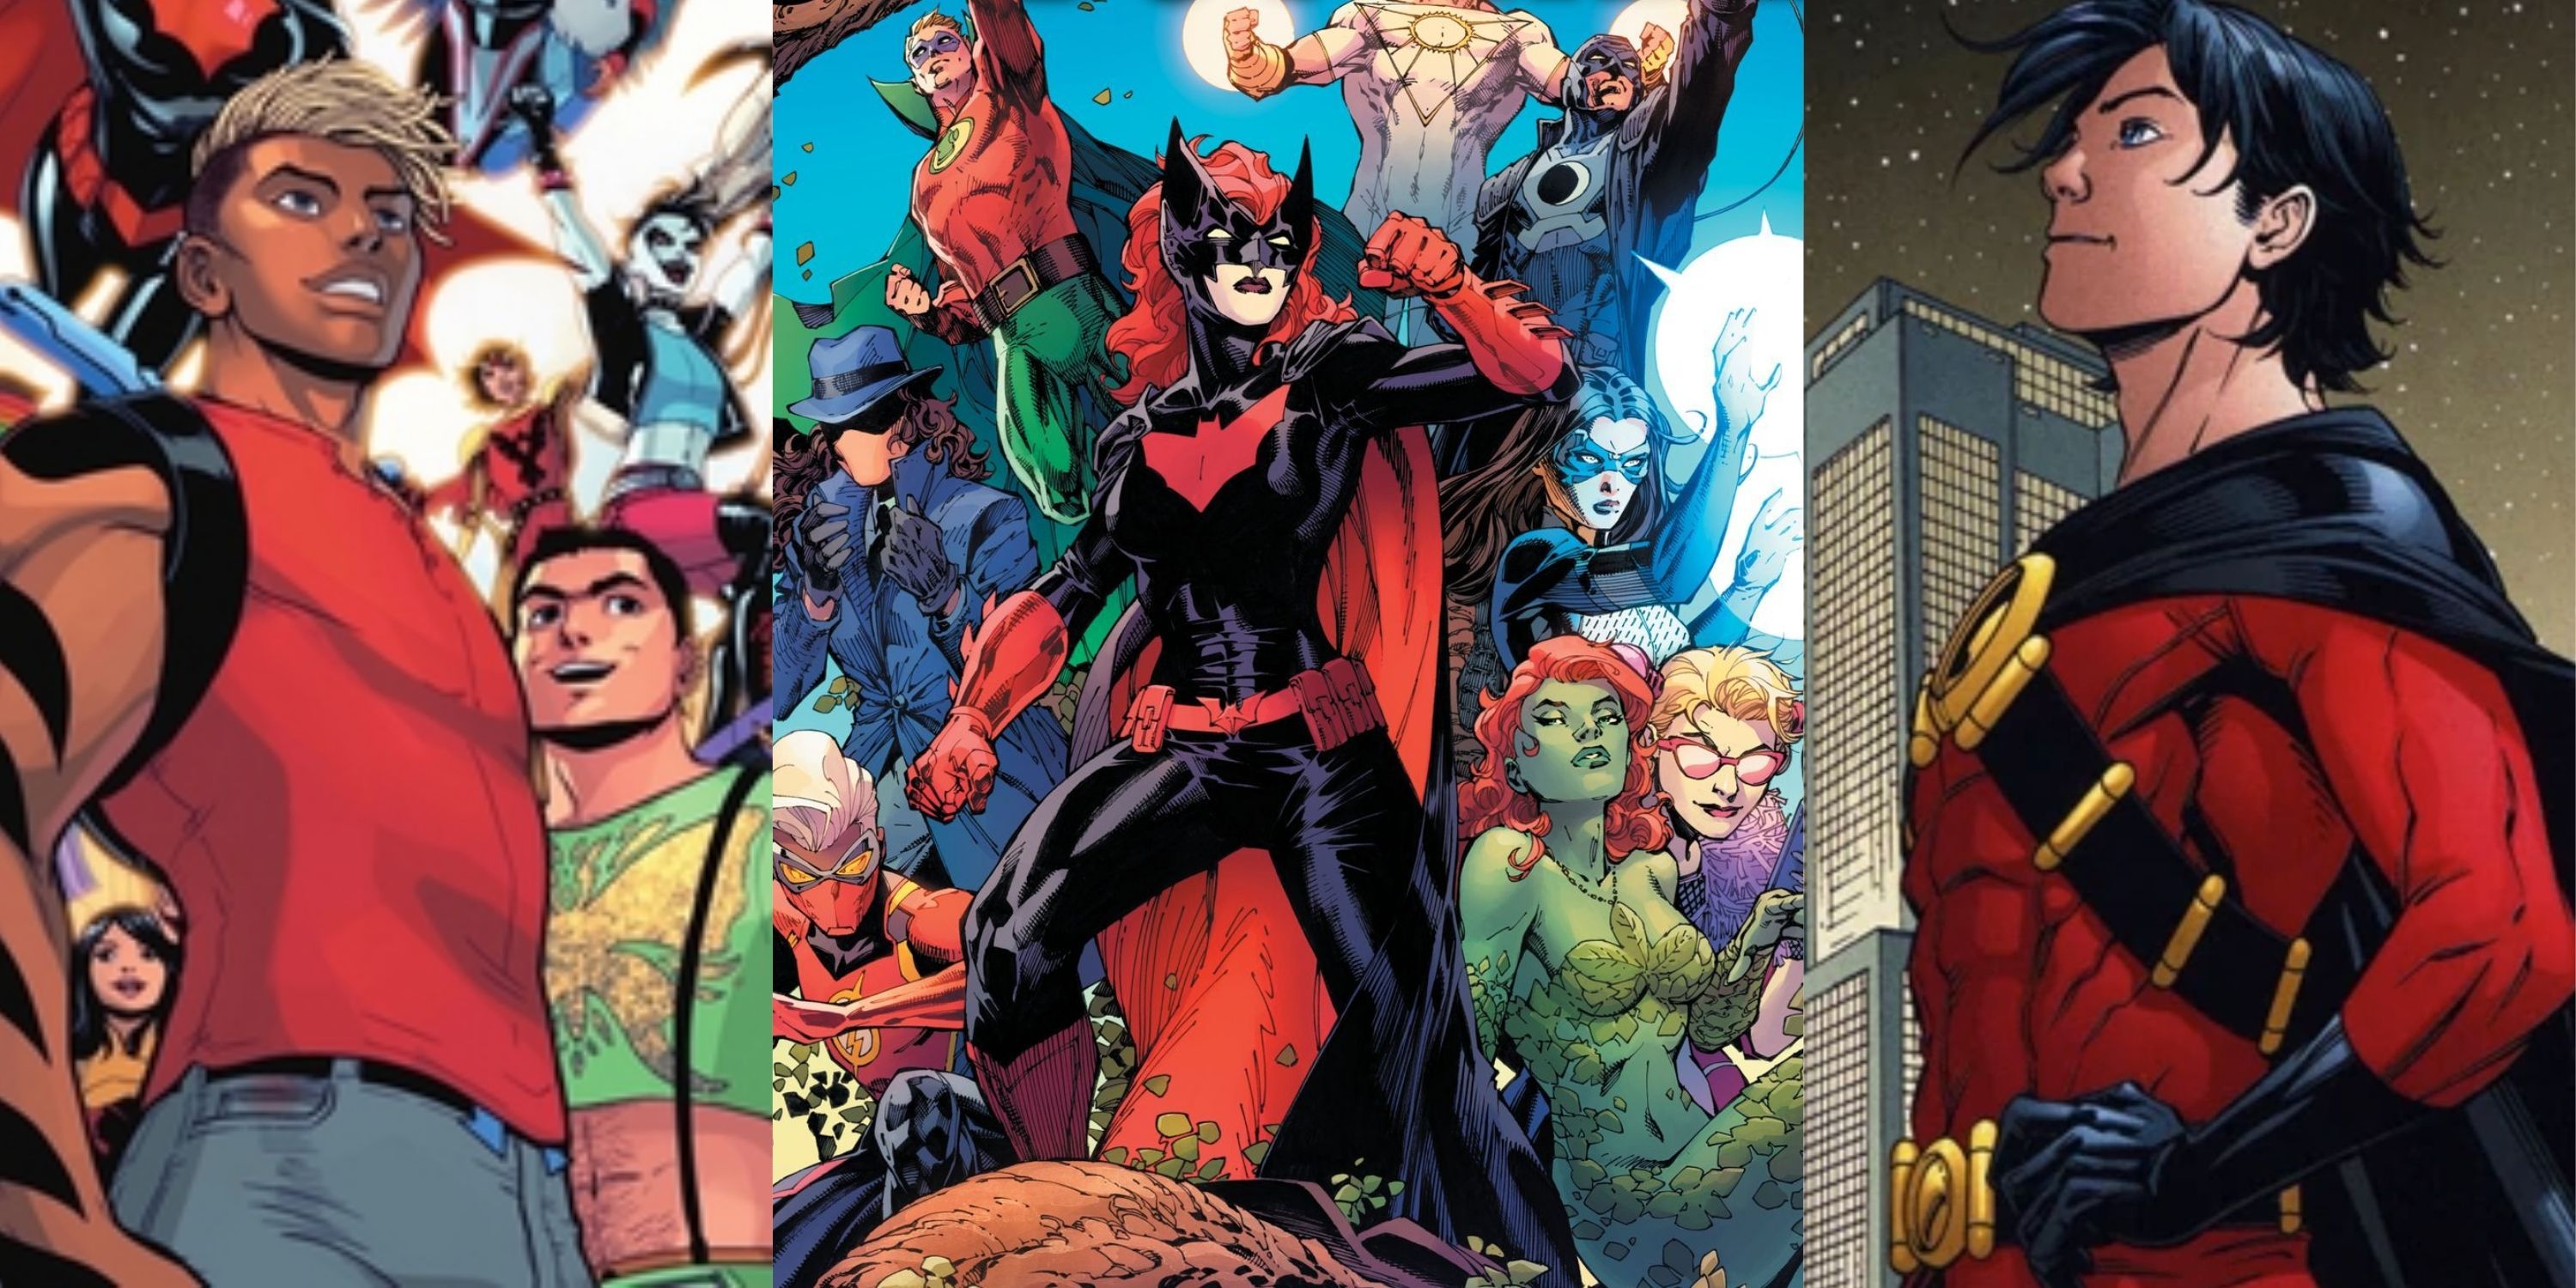 LGBTQ+ charactres in DC comics: Aqualad in Justice League Queer, Batwoman on PRIDE cover, and Robin